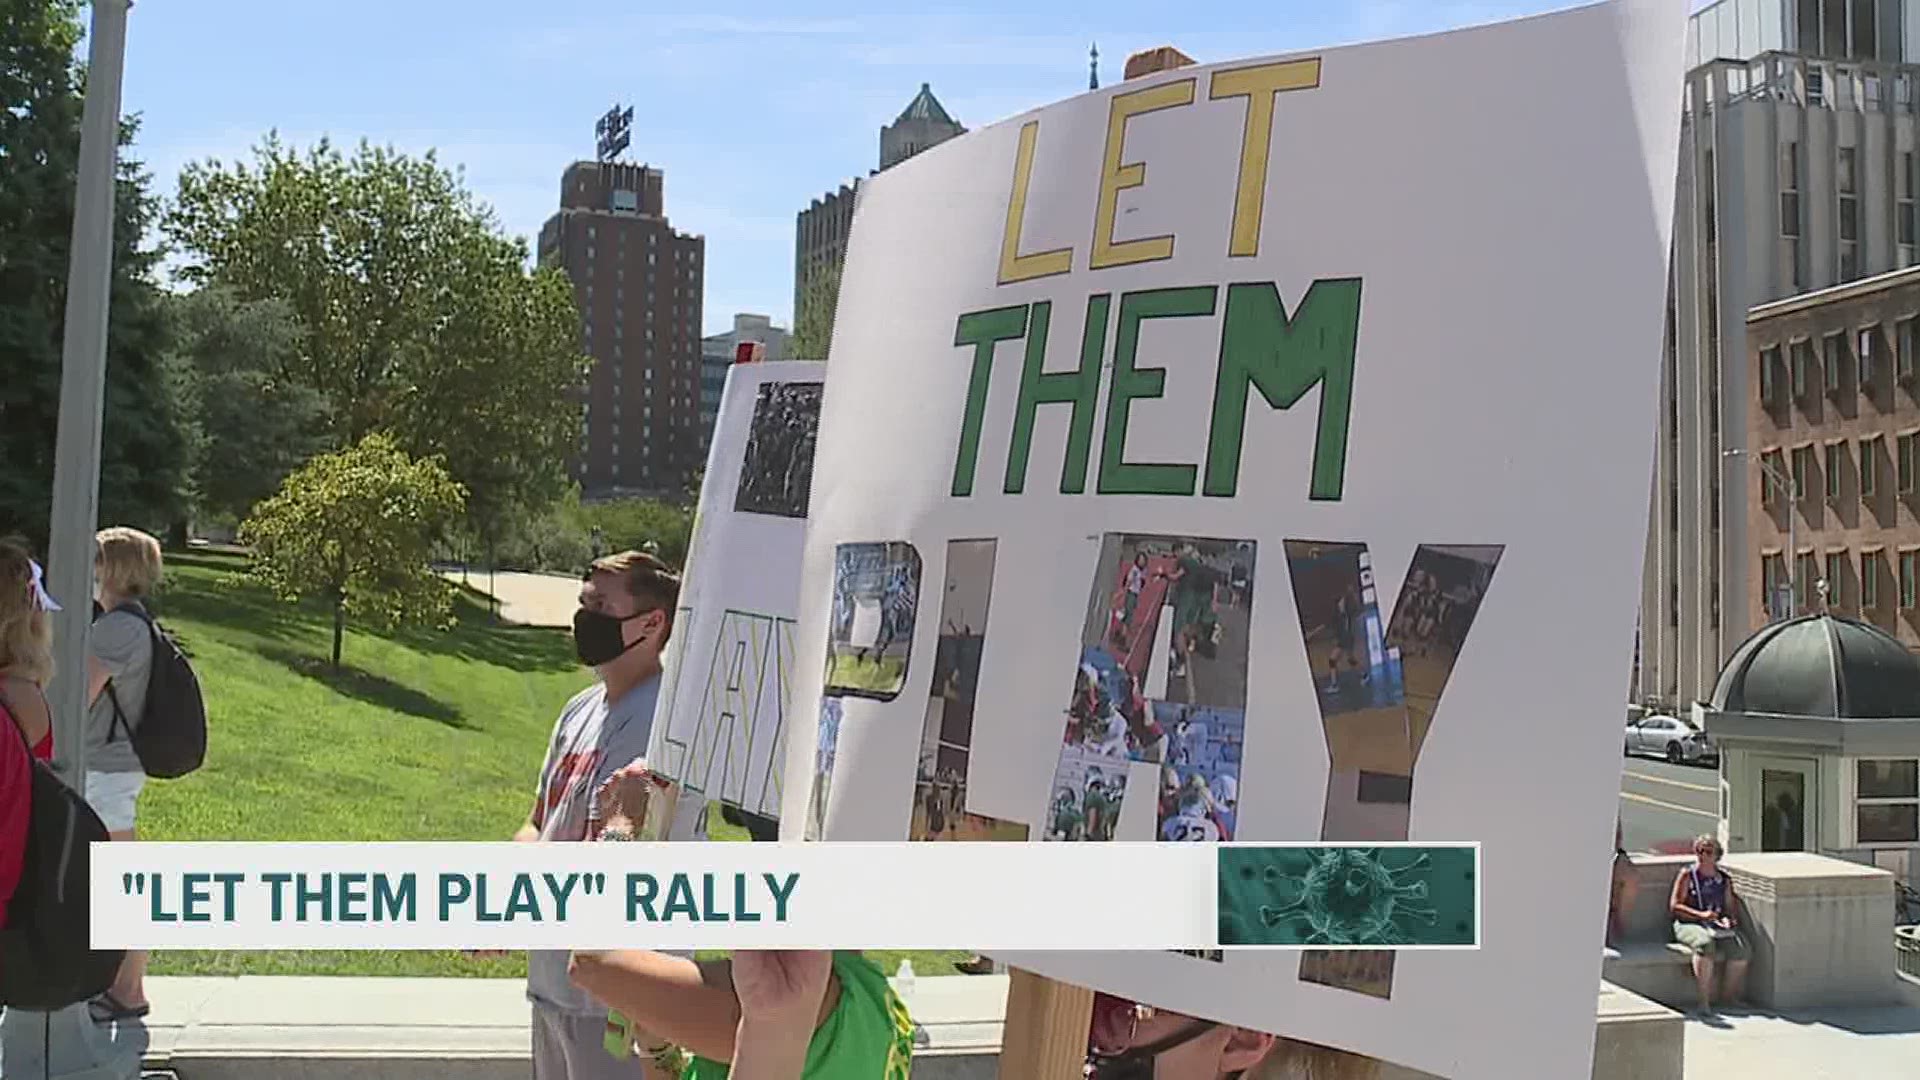 The rally in Harrisburg came as the PIAA is set to meet on Friday